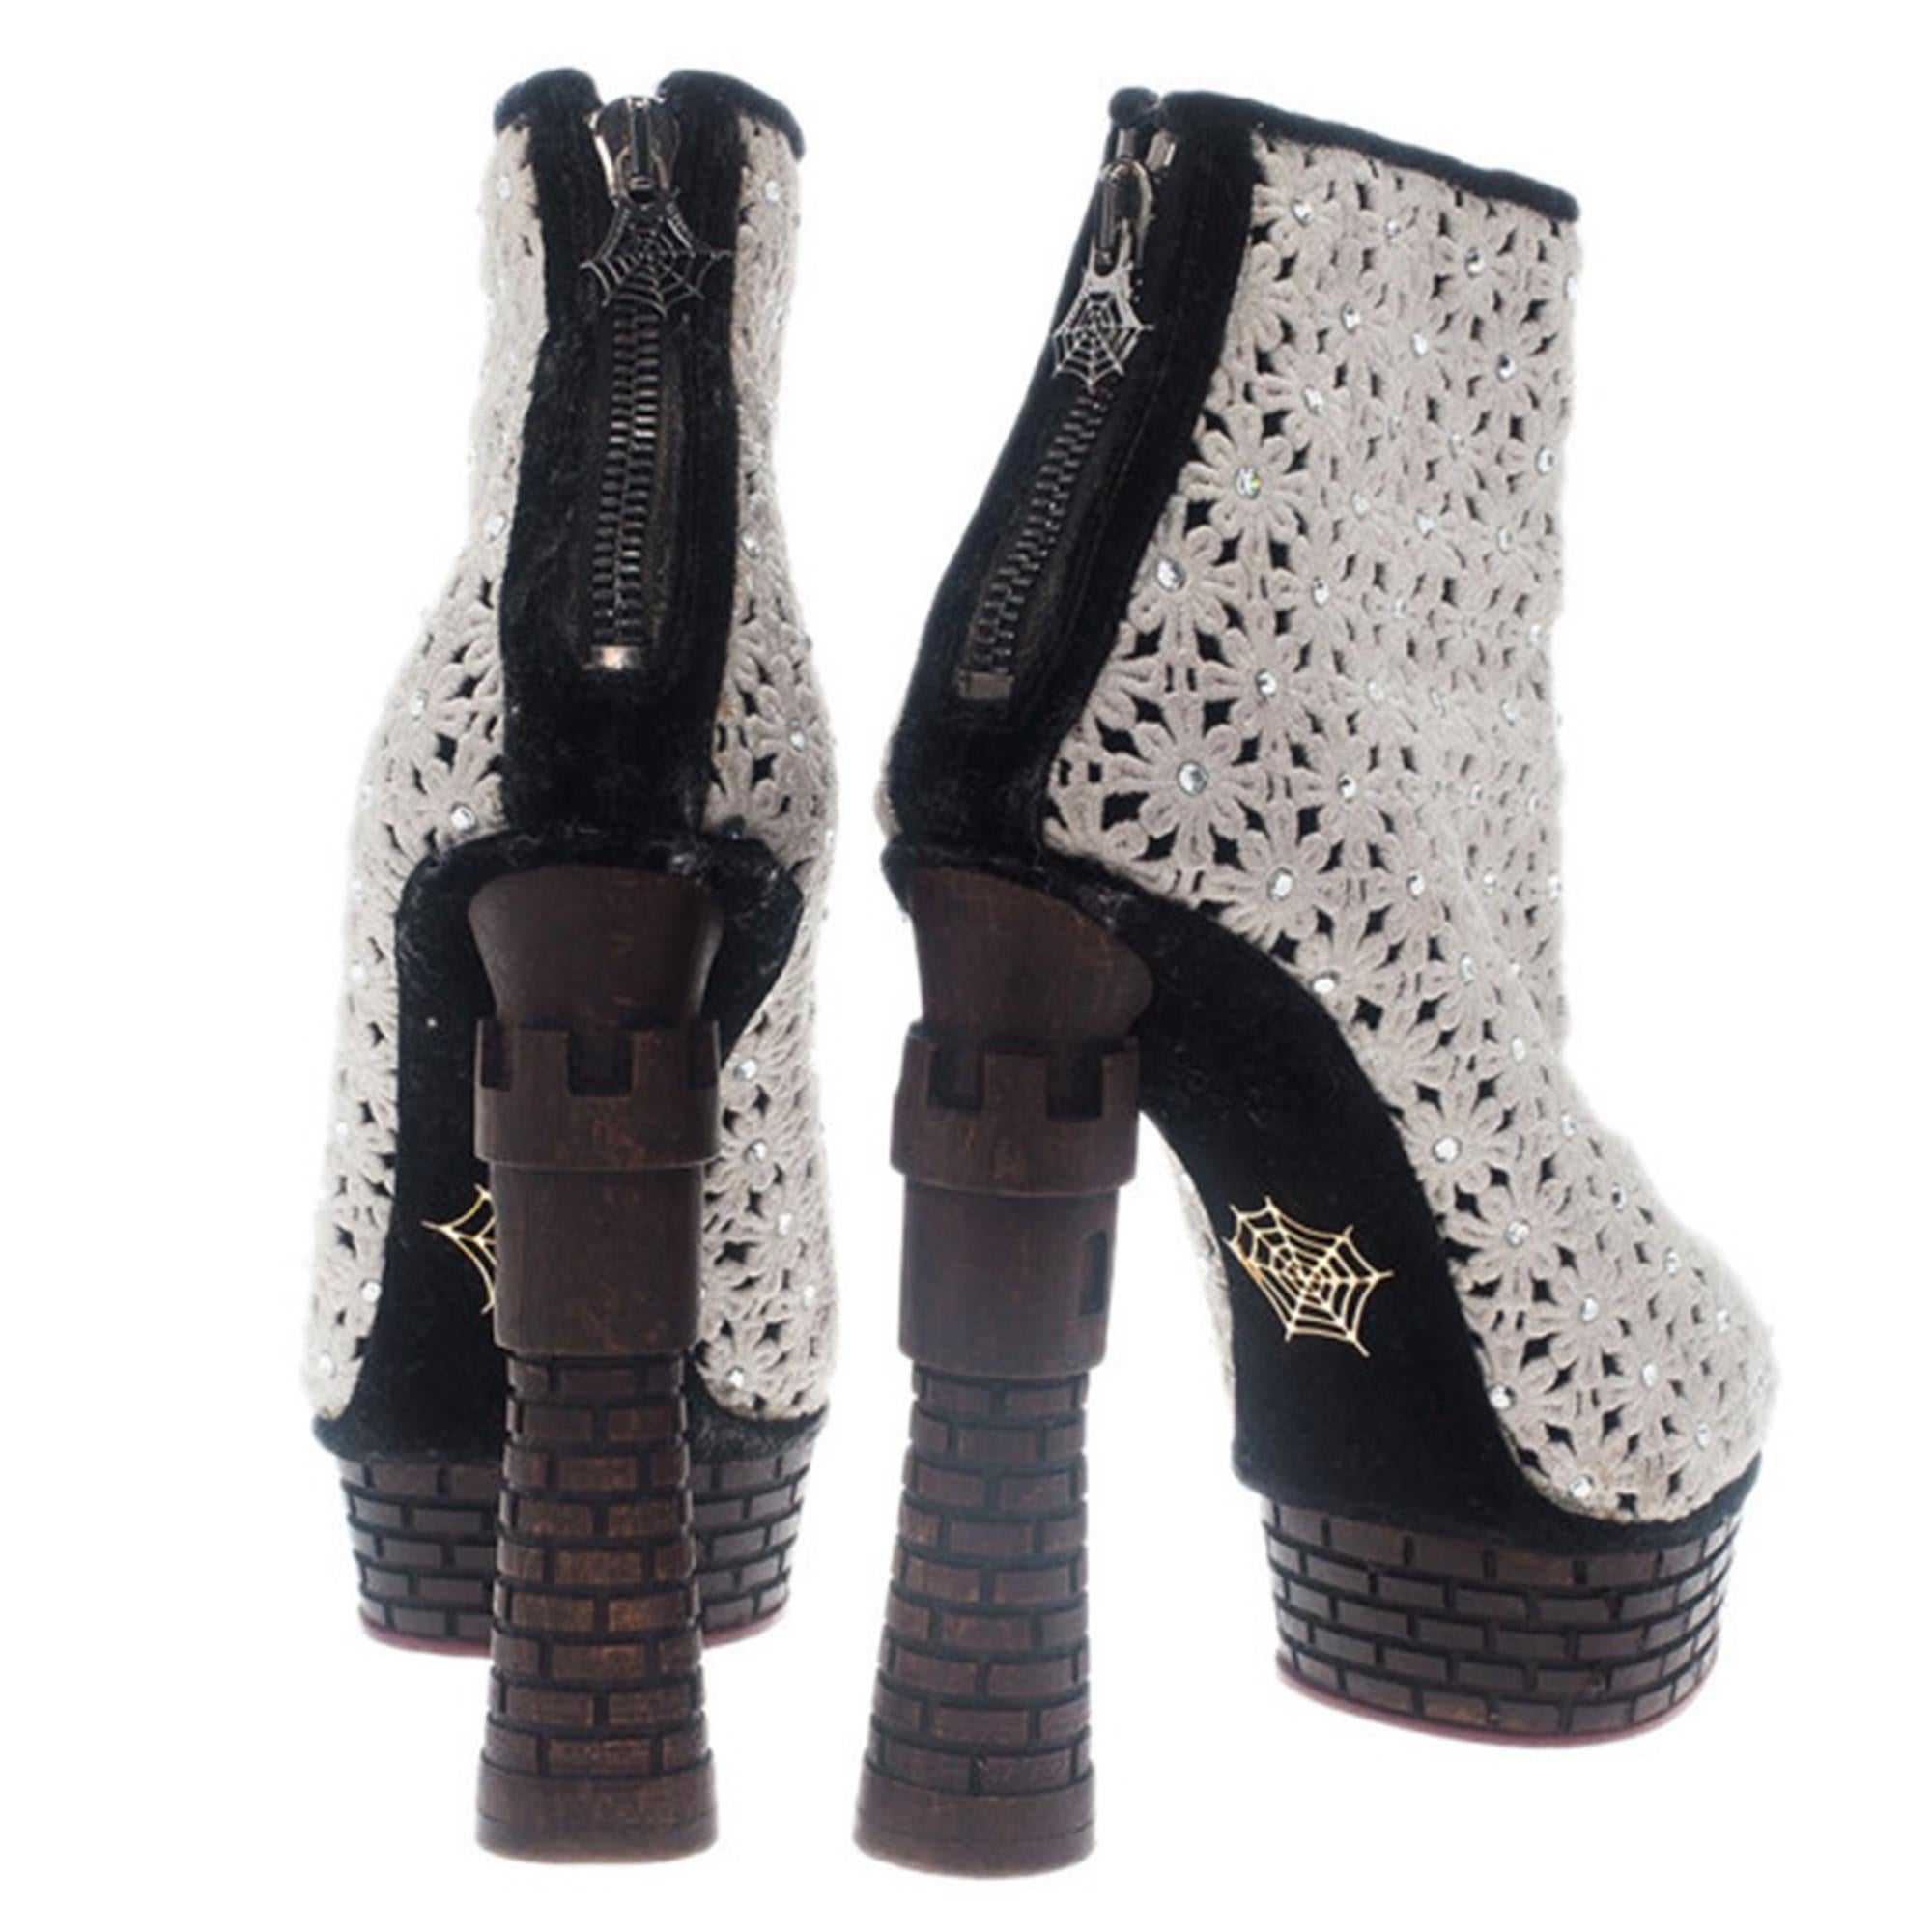 Gray Charlotte Olympia Cream Damsel In Distress Crocheted Ankle Boots Size 36.5